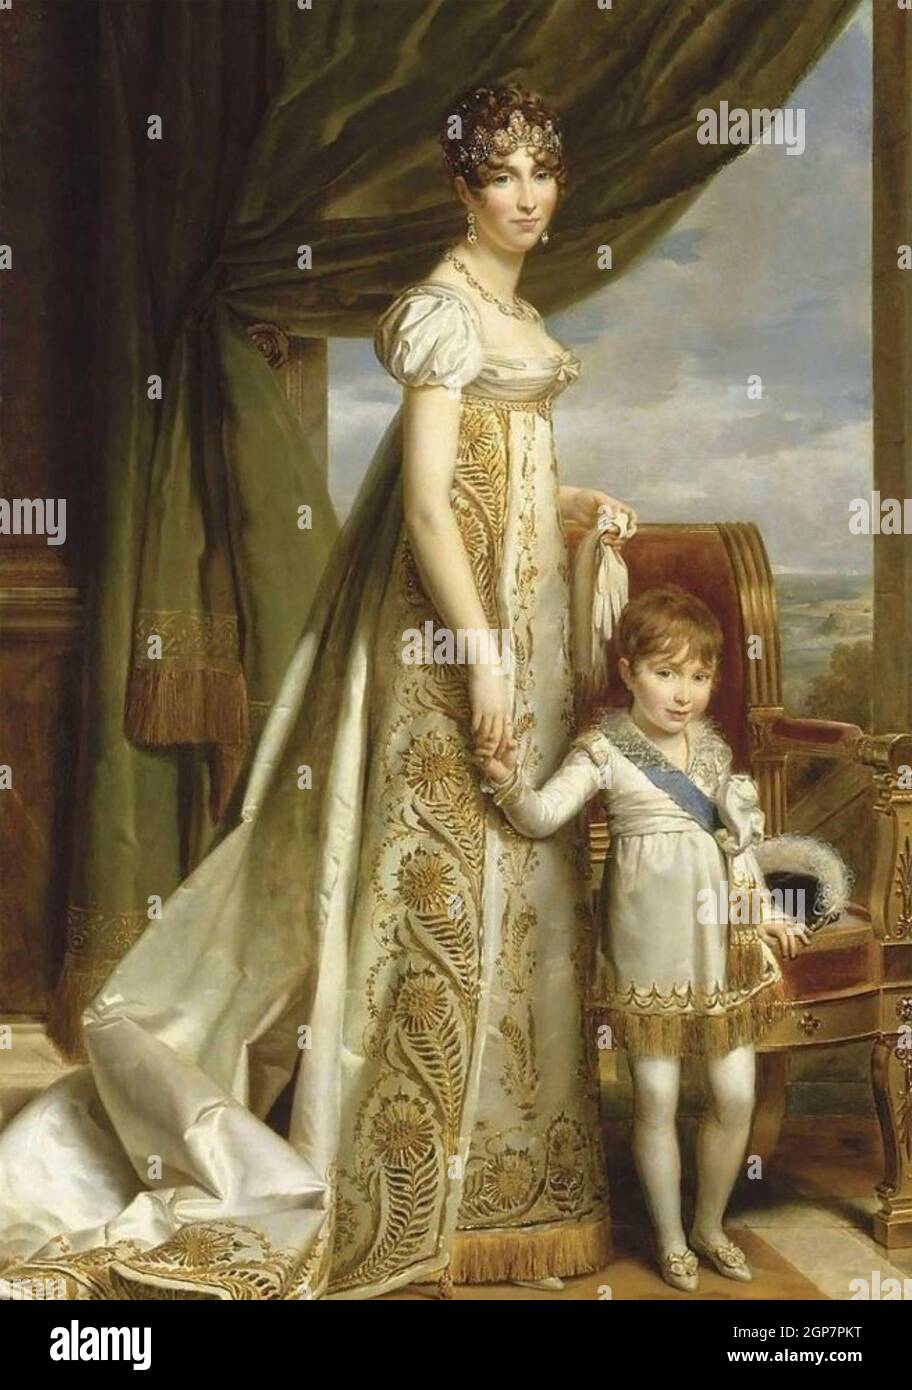 HORTENSE BONAPARTE (1783-1837) Queen consort of Holland, daughter of Napoleon's first wife. Child may be her illegitimate son Charles, Duke of Morny Stock Photo